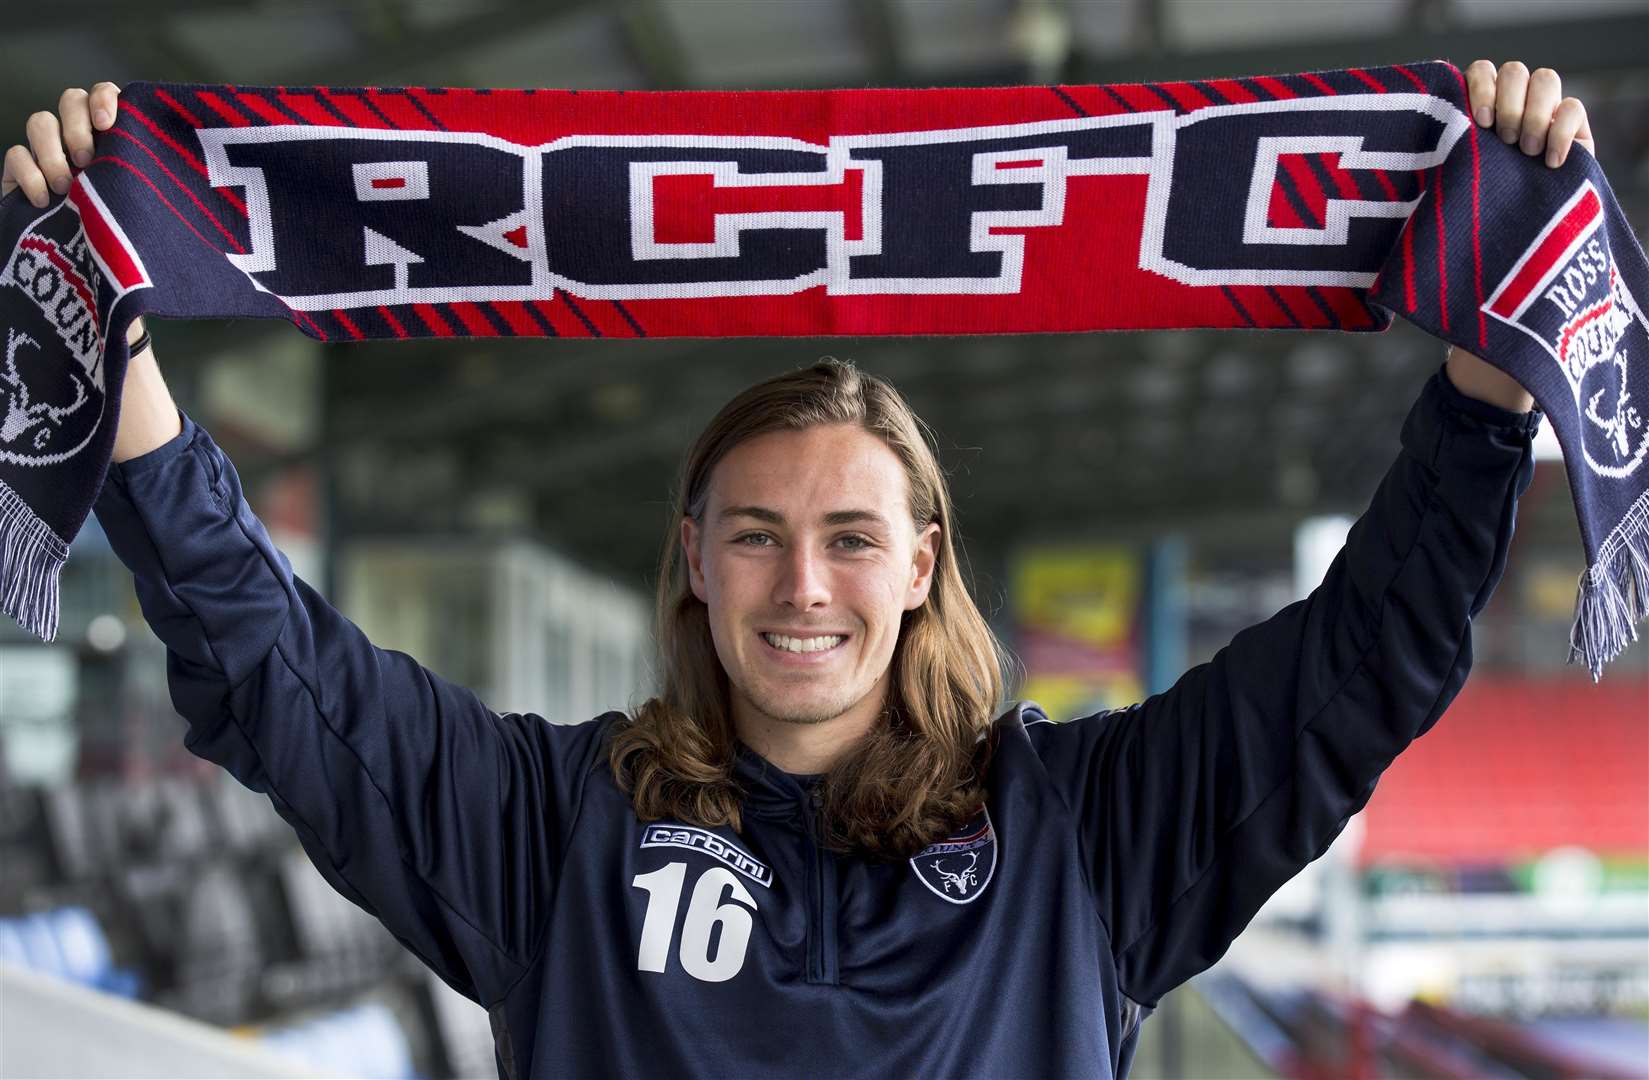 Jackson Irvine when he signed for Ross County.